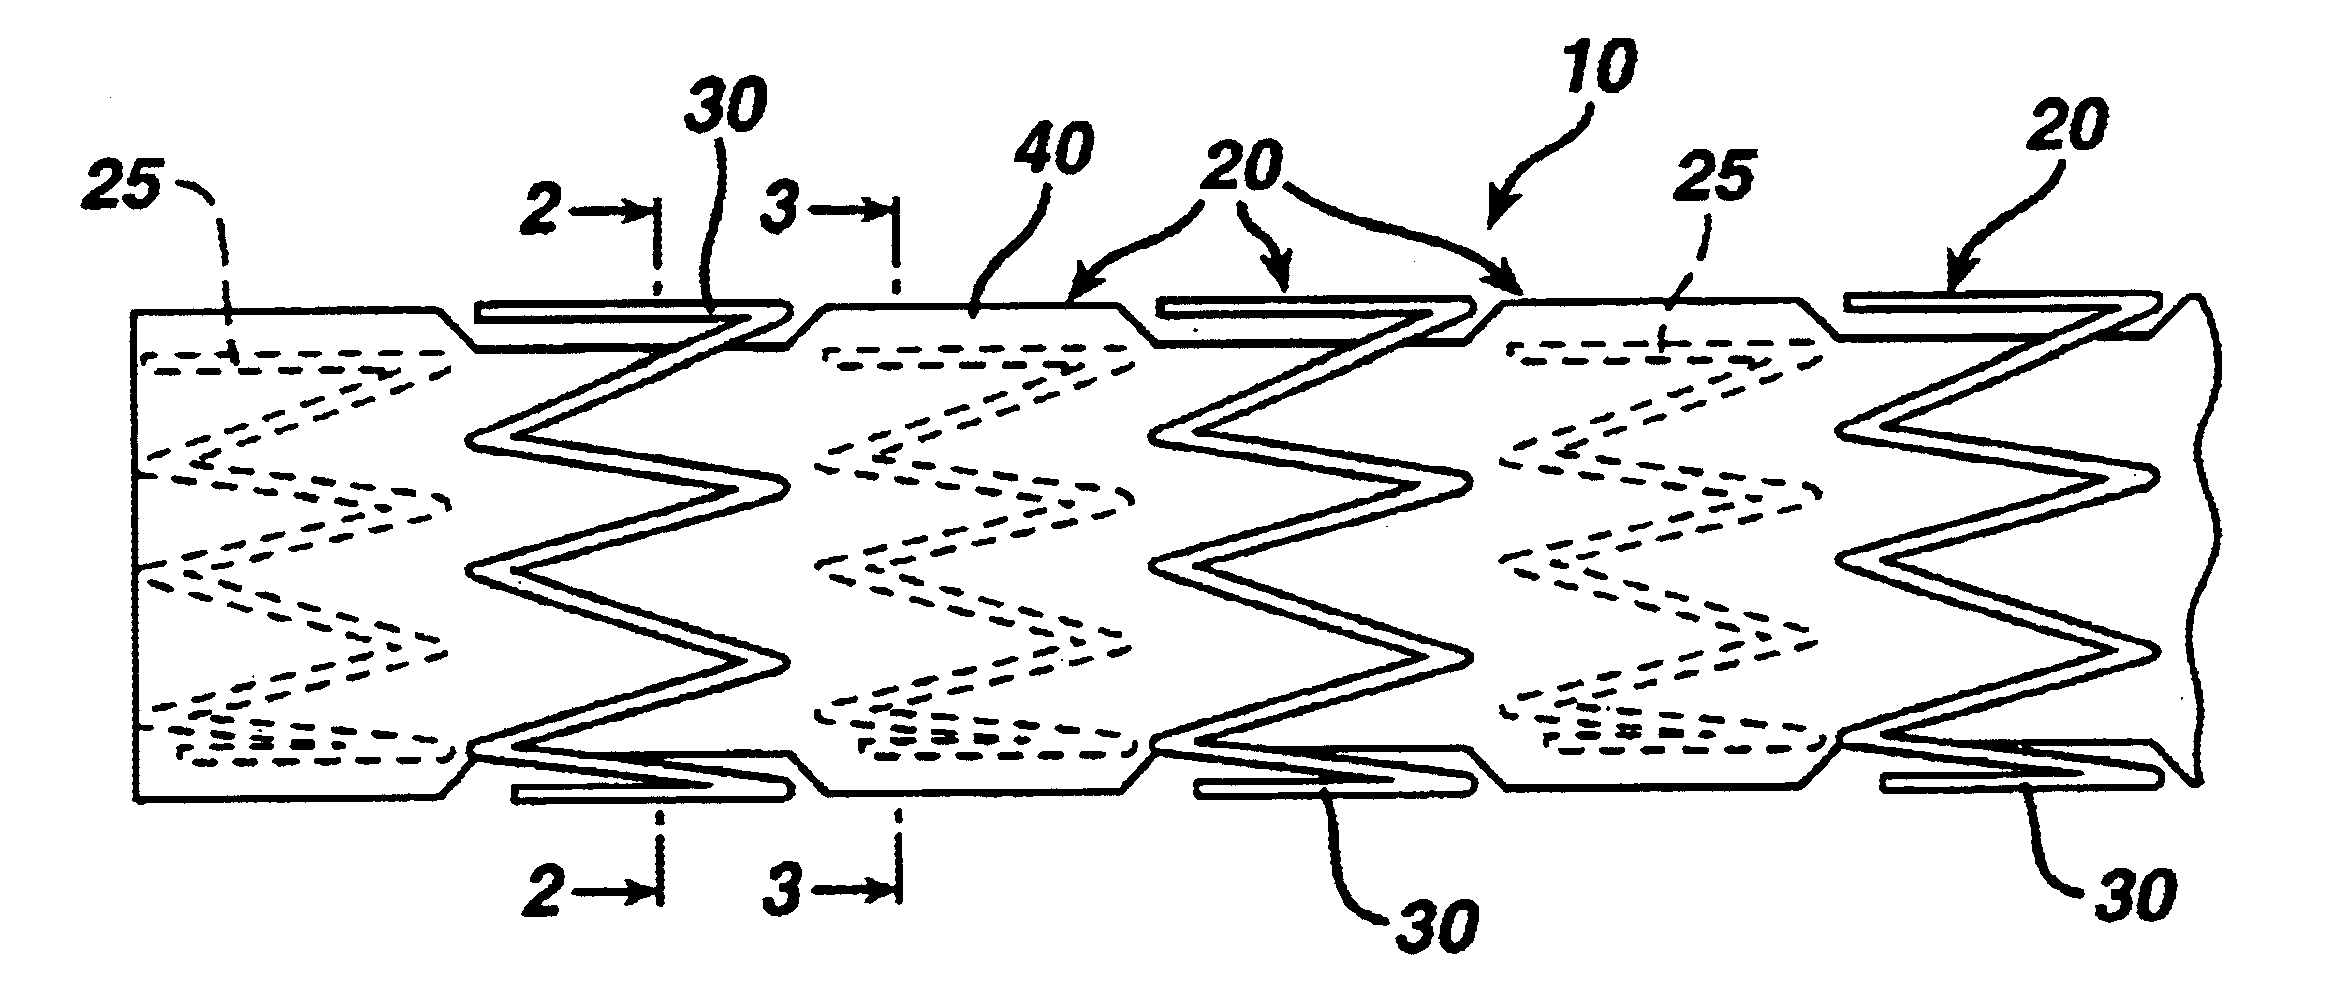 Covered segmented stent